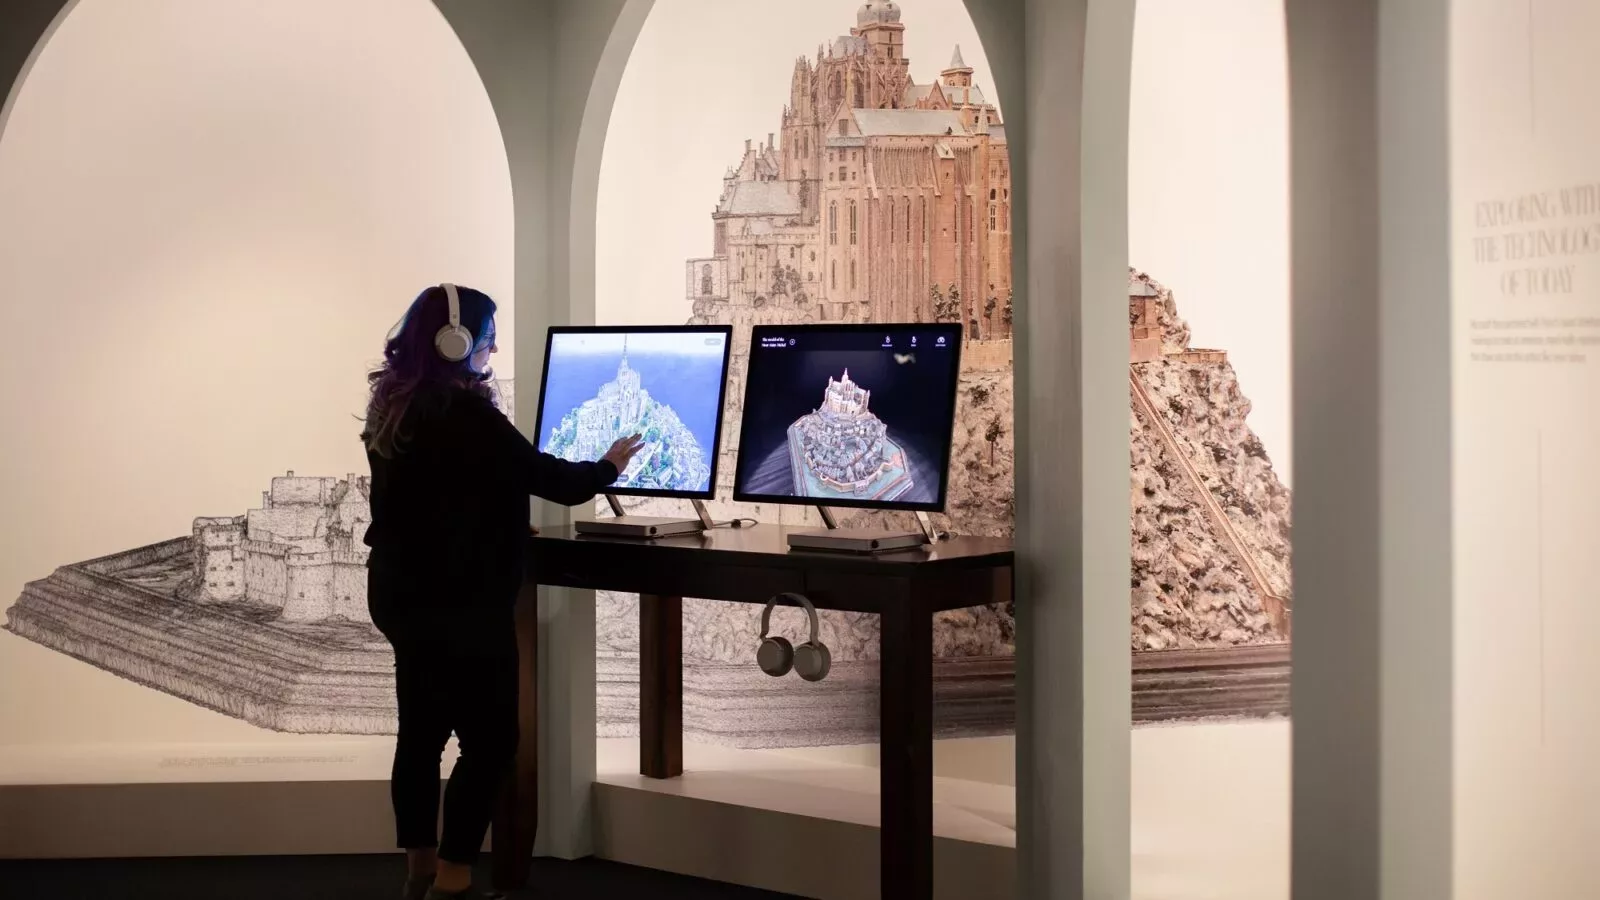 A woman dressed in black wears headphones and uses a touchscreen to explore an exhibit on the 3D model of Mont Saint Michel, on display behind arched windows in a room in front of her.